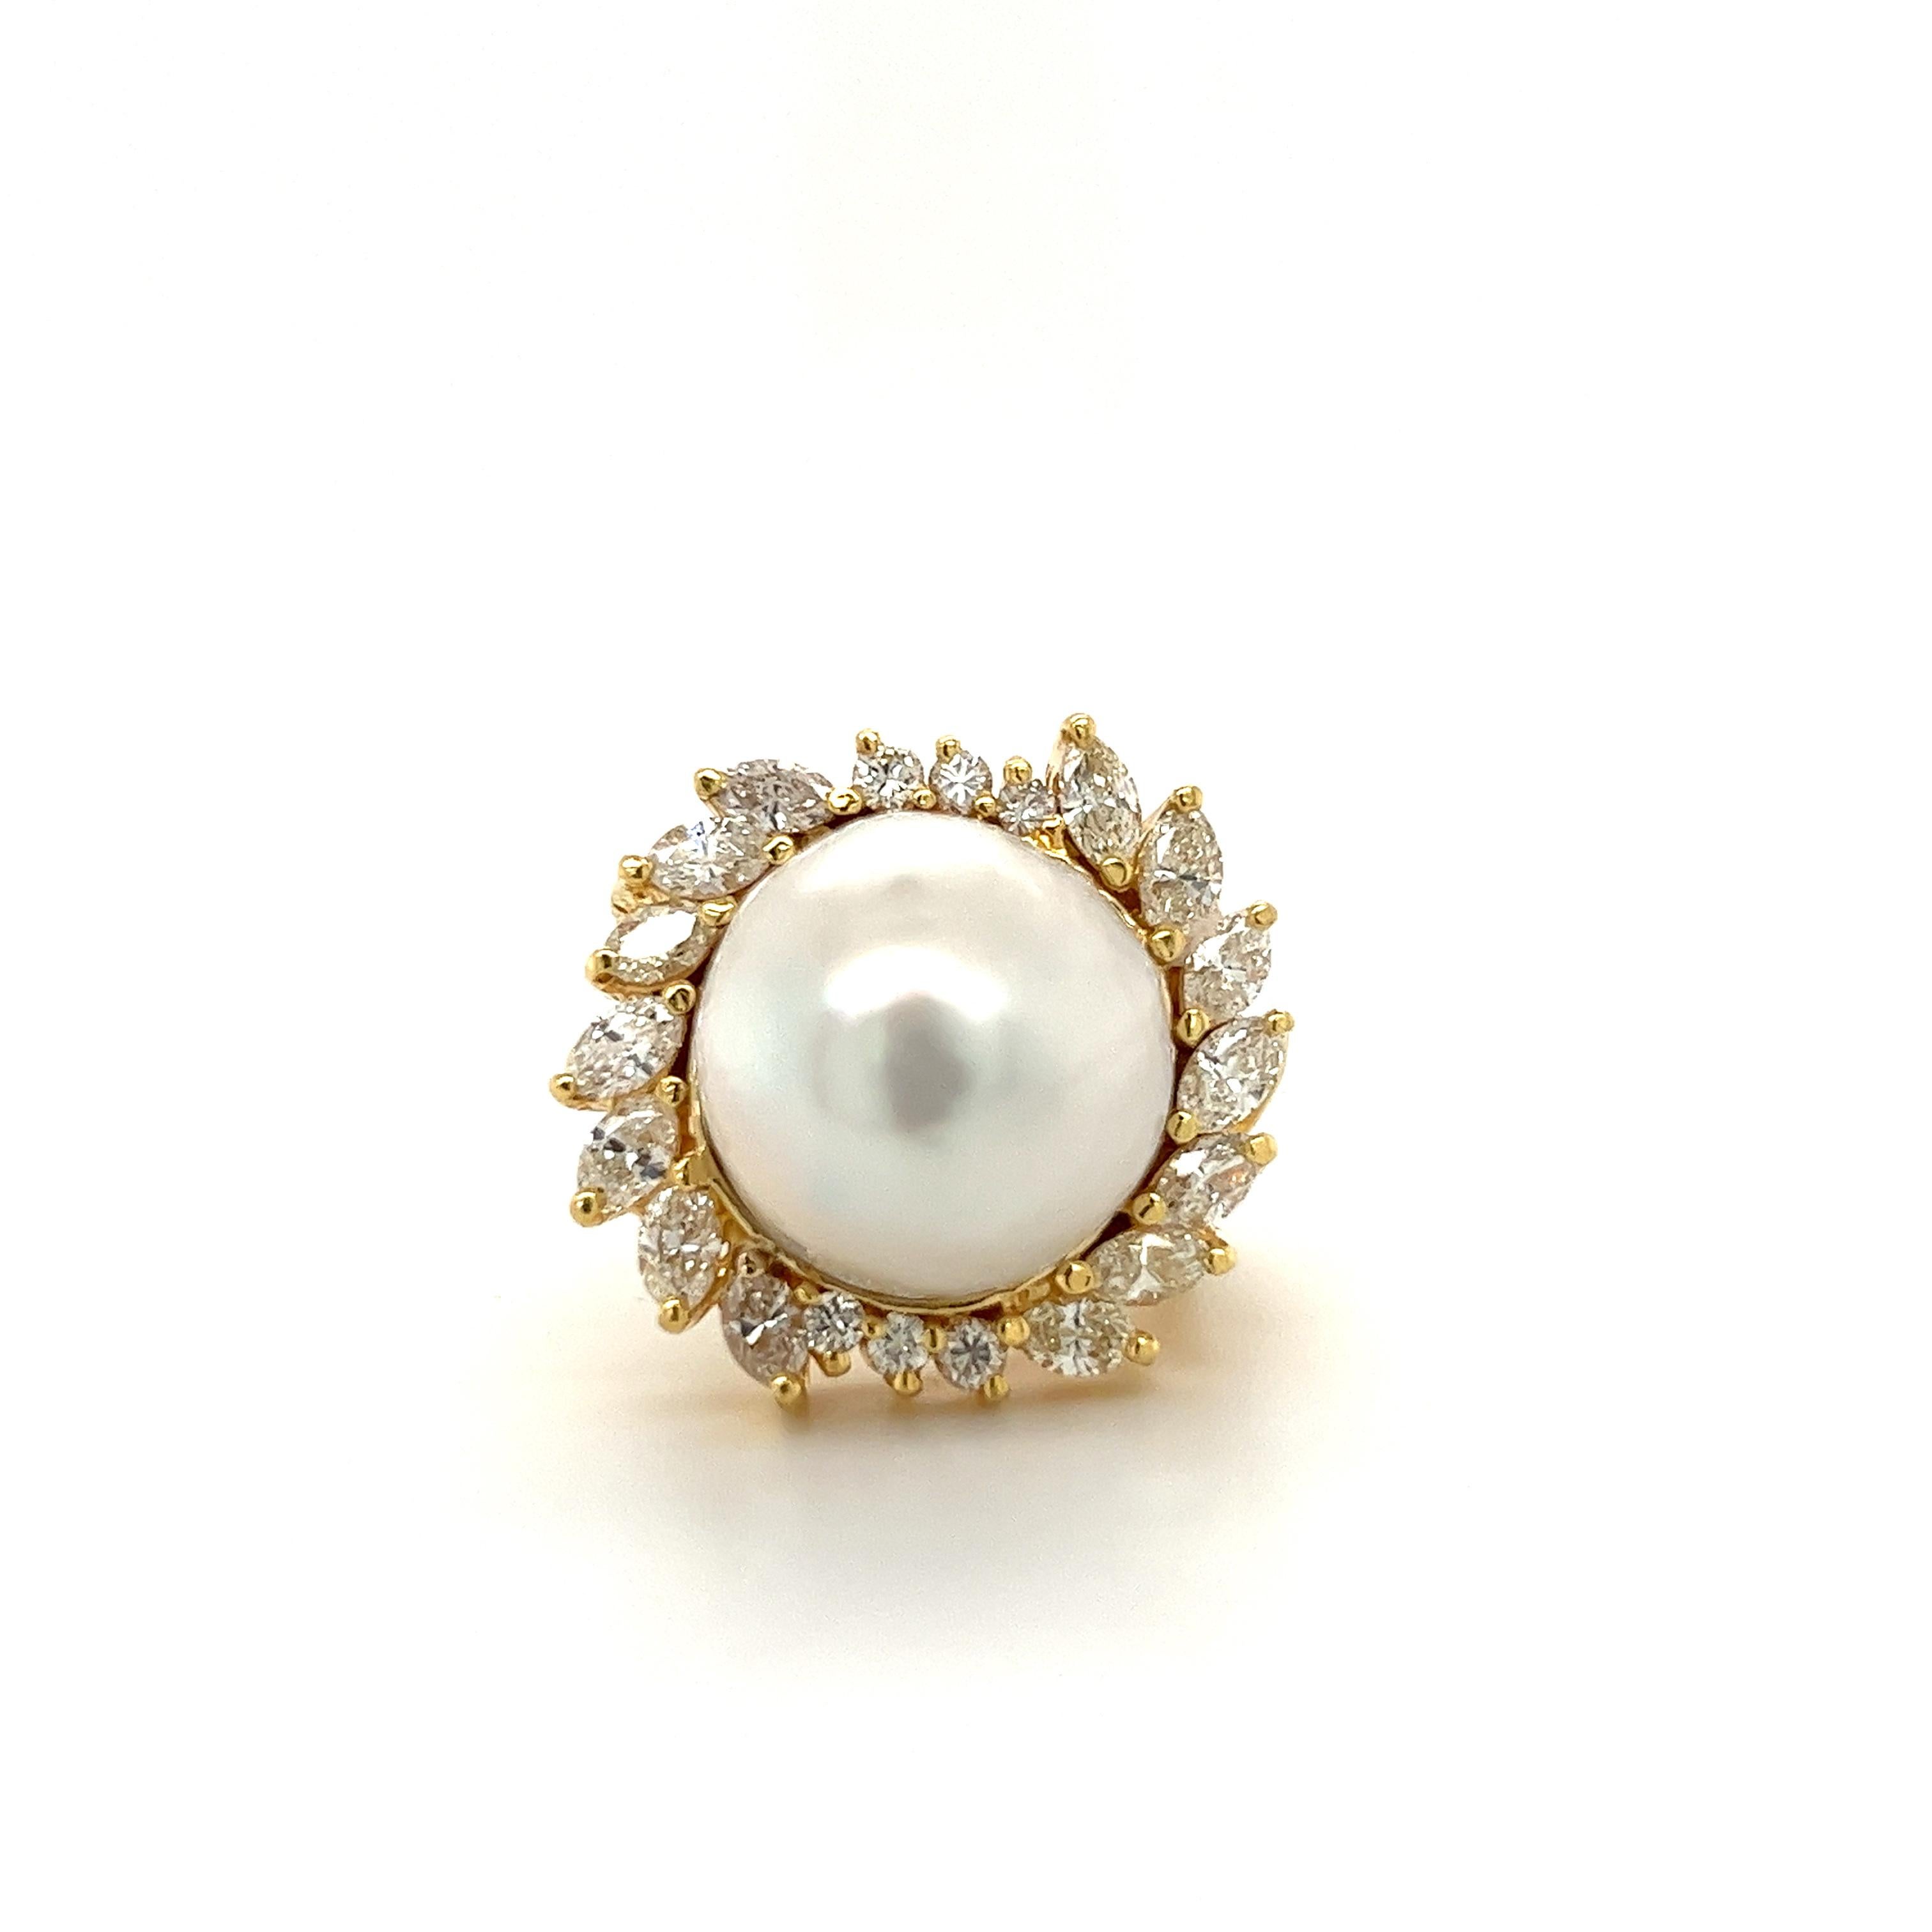 Vintage pearl and diamond ring set in 18 karat solid yellow gold. The pearl is set with over 3 carats in marquise and round-cut diamond halo. This South Sea Pearl bears a vibrant white luster with little to no blemishes. The perfect heirloom piece